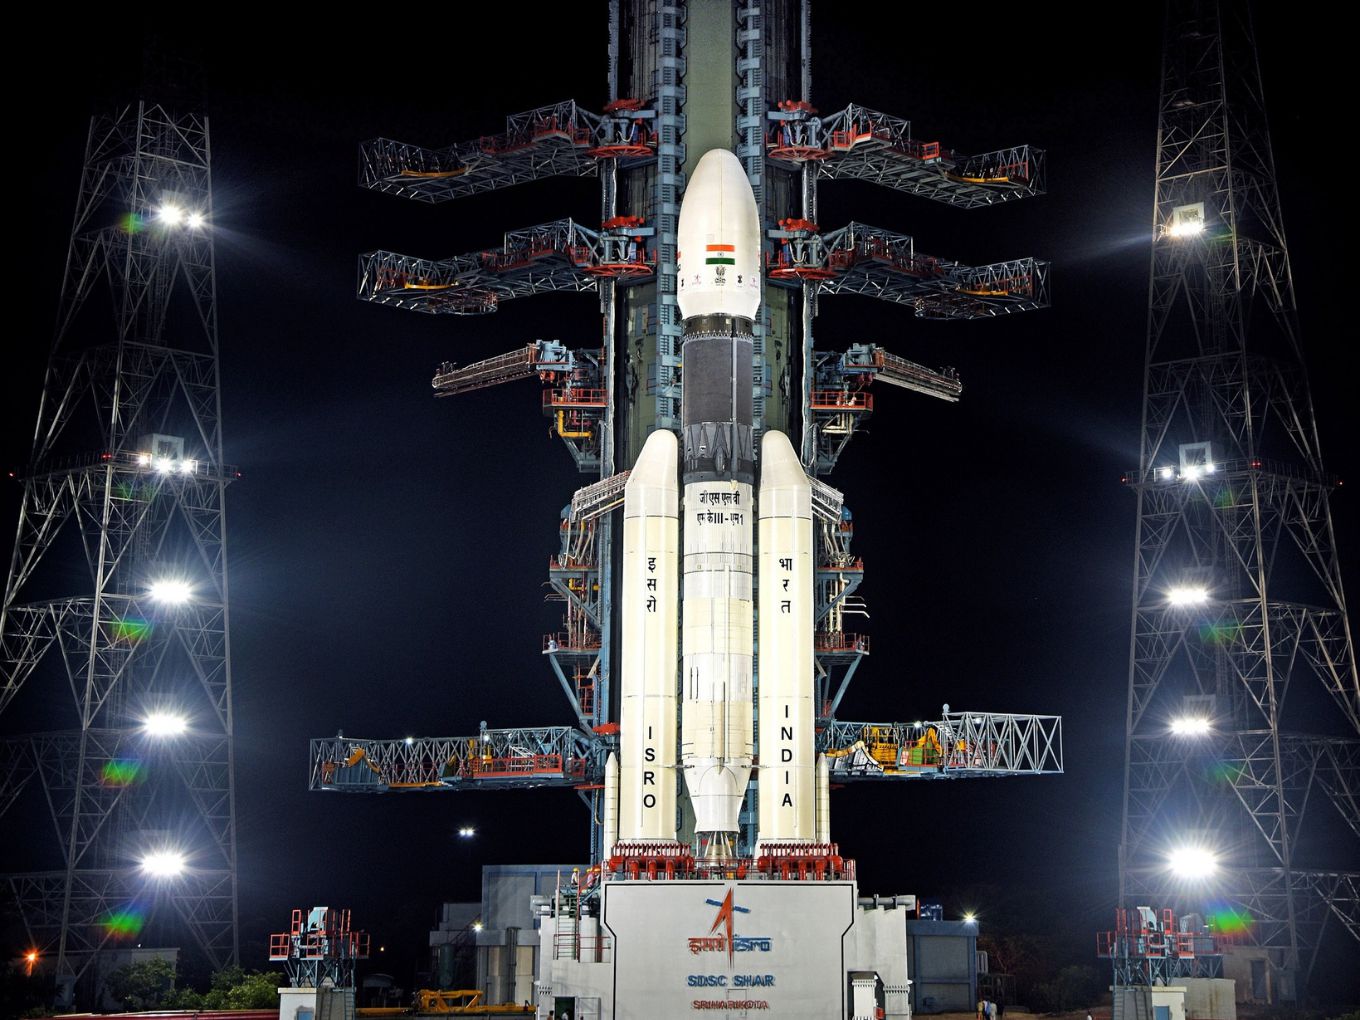 India’s Moon Mission: Chandrayaan 2 Nears Landing Date Of Sept 7